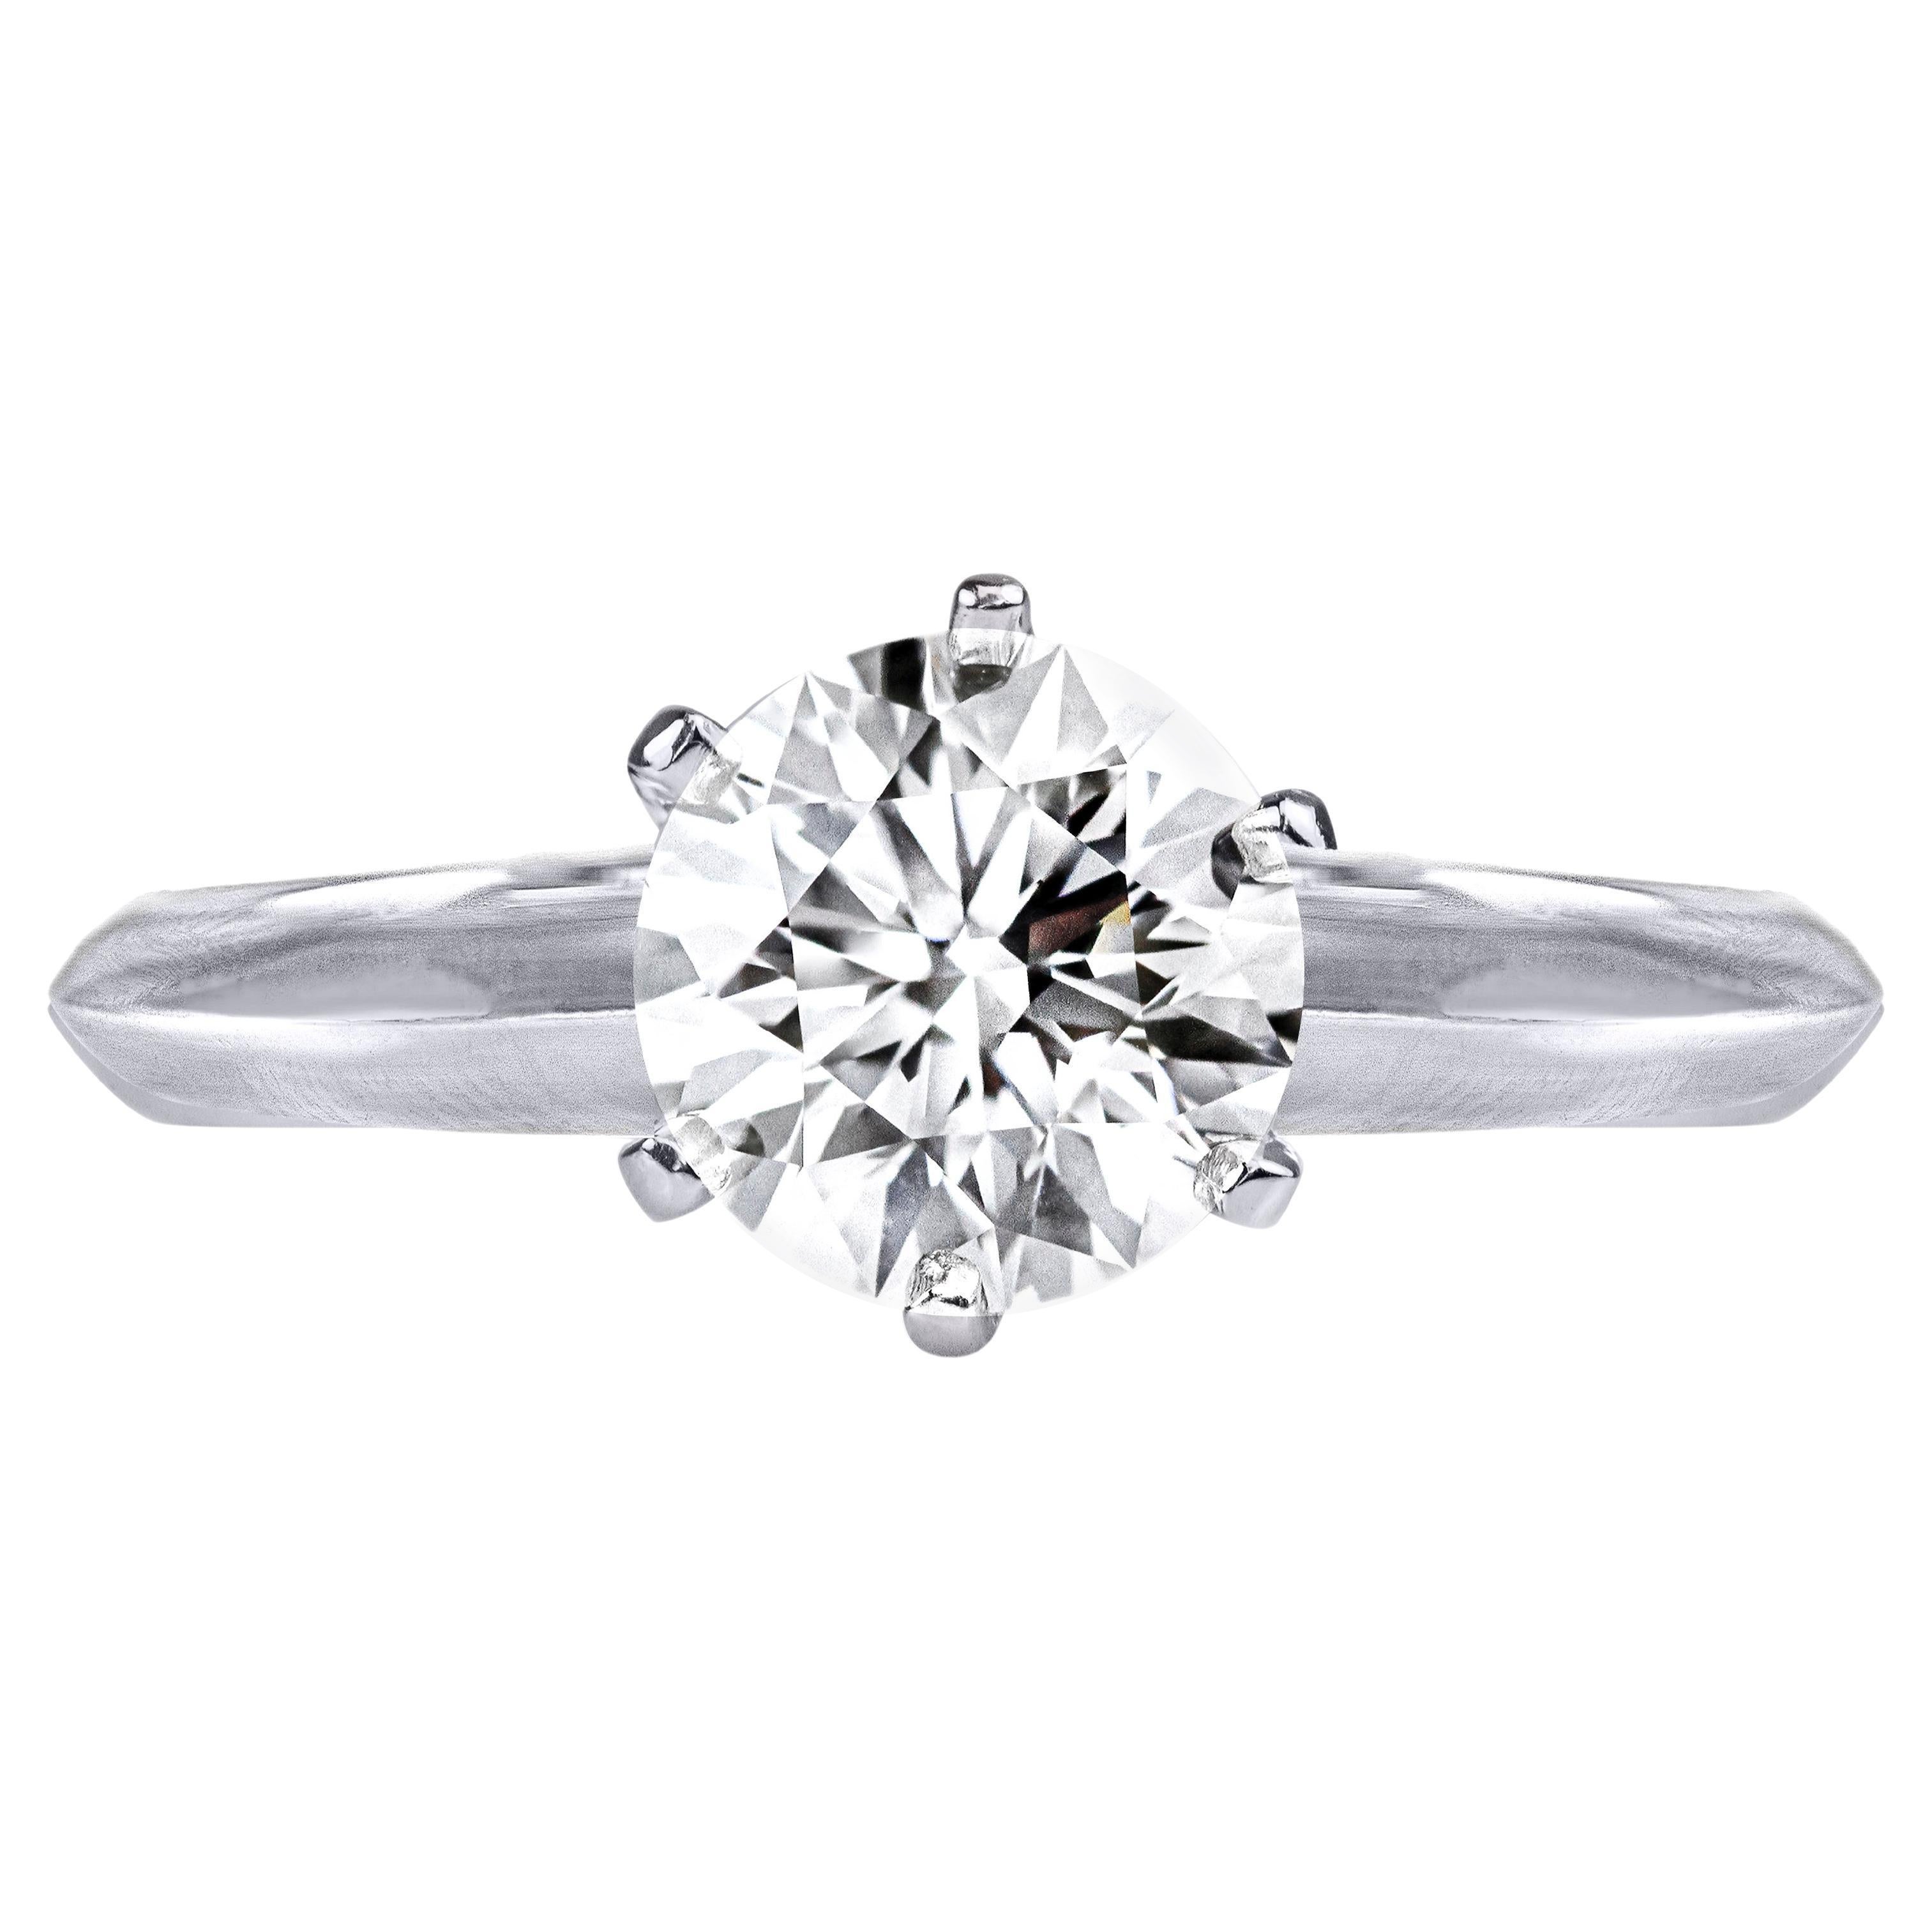 Tiffany & Co. GIA Certified 1.14 Carat Diamond Solitaire Engagement Ring For Sale